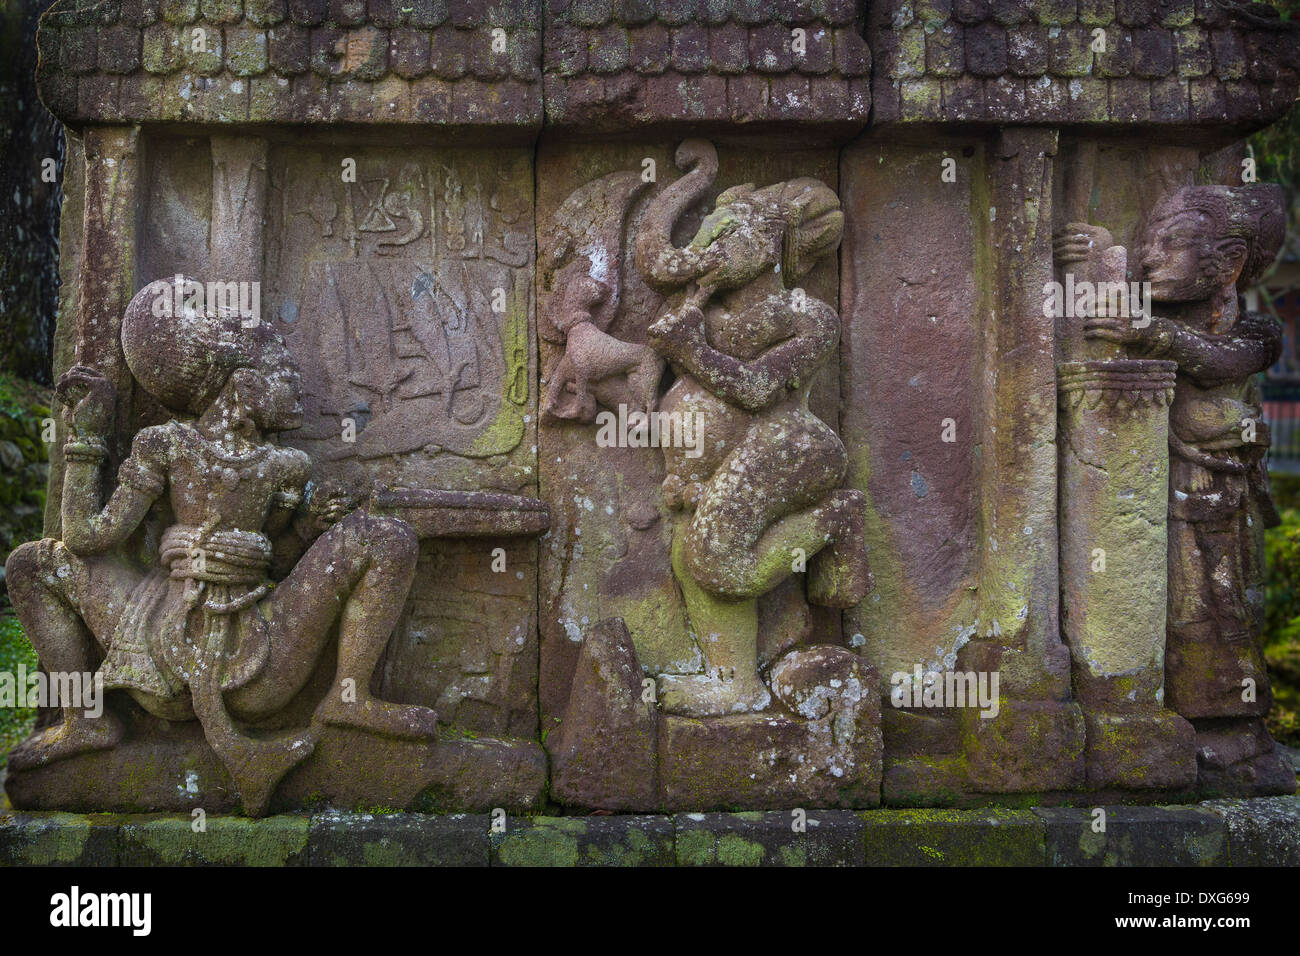 Bas relief Candi Sukuh, a Javanese Hindu temple located on the western slope of Mount Lawu, Java, Indonesia. Stock Photo